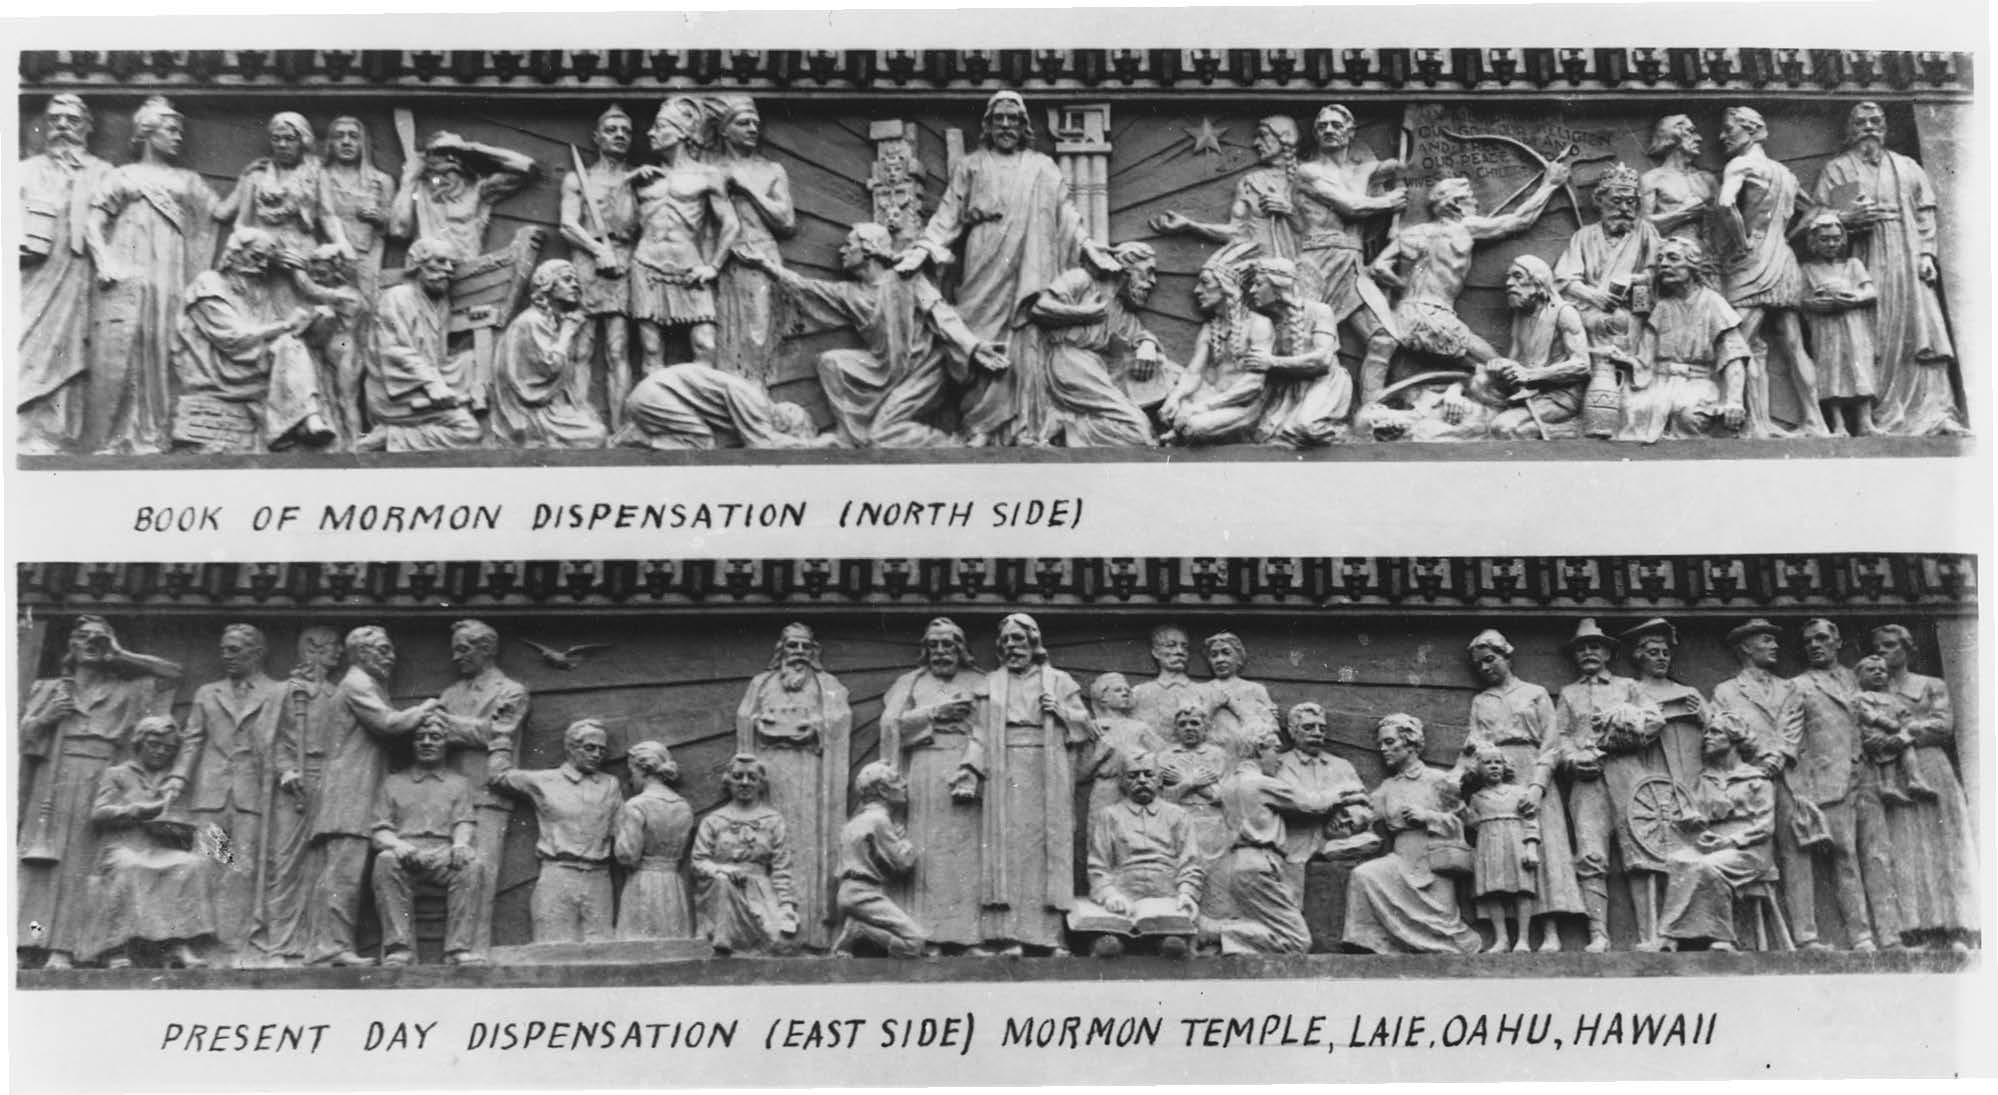 These friezes encircling the temple’s cornice are among a number of artistic adornments to the Laie Hawaii Temple. See additional information on the friezes in appendix 2. Courtesy of Church History Library.